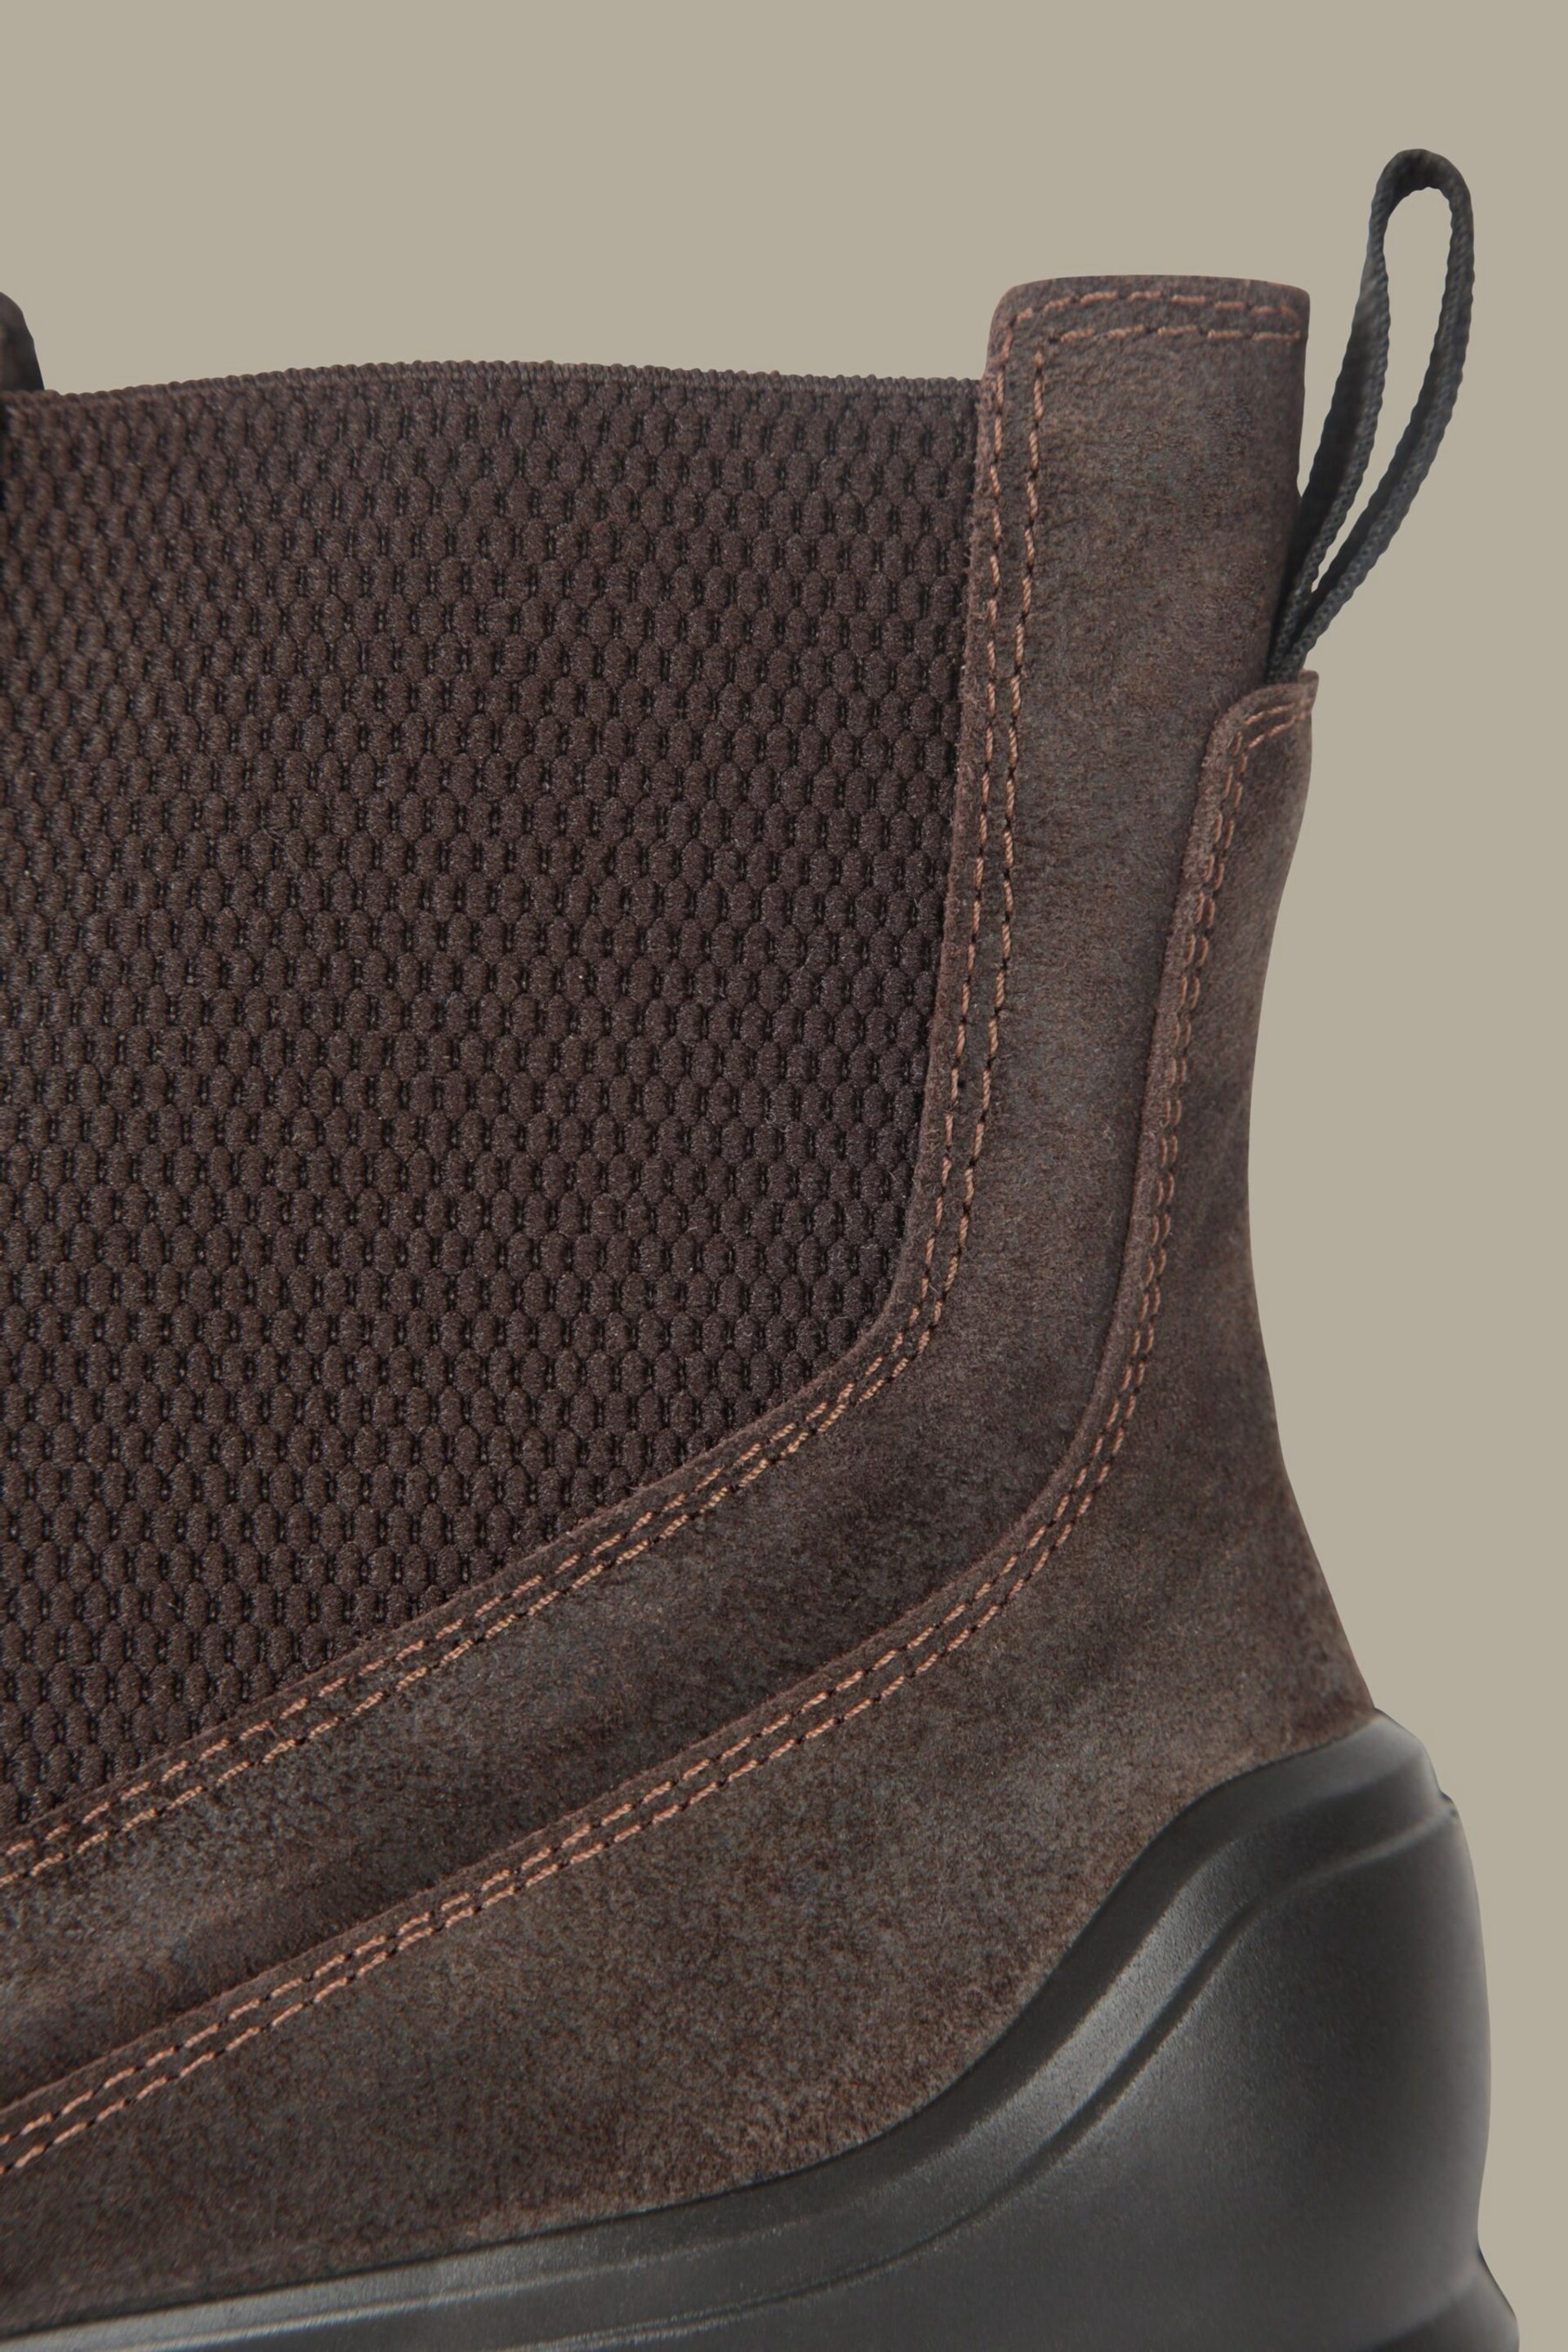 Mountain Warehouse Brown Salcombe Mens Waterproof Leather Chelsea Boots - Image 4 of 5